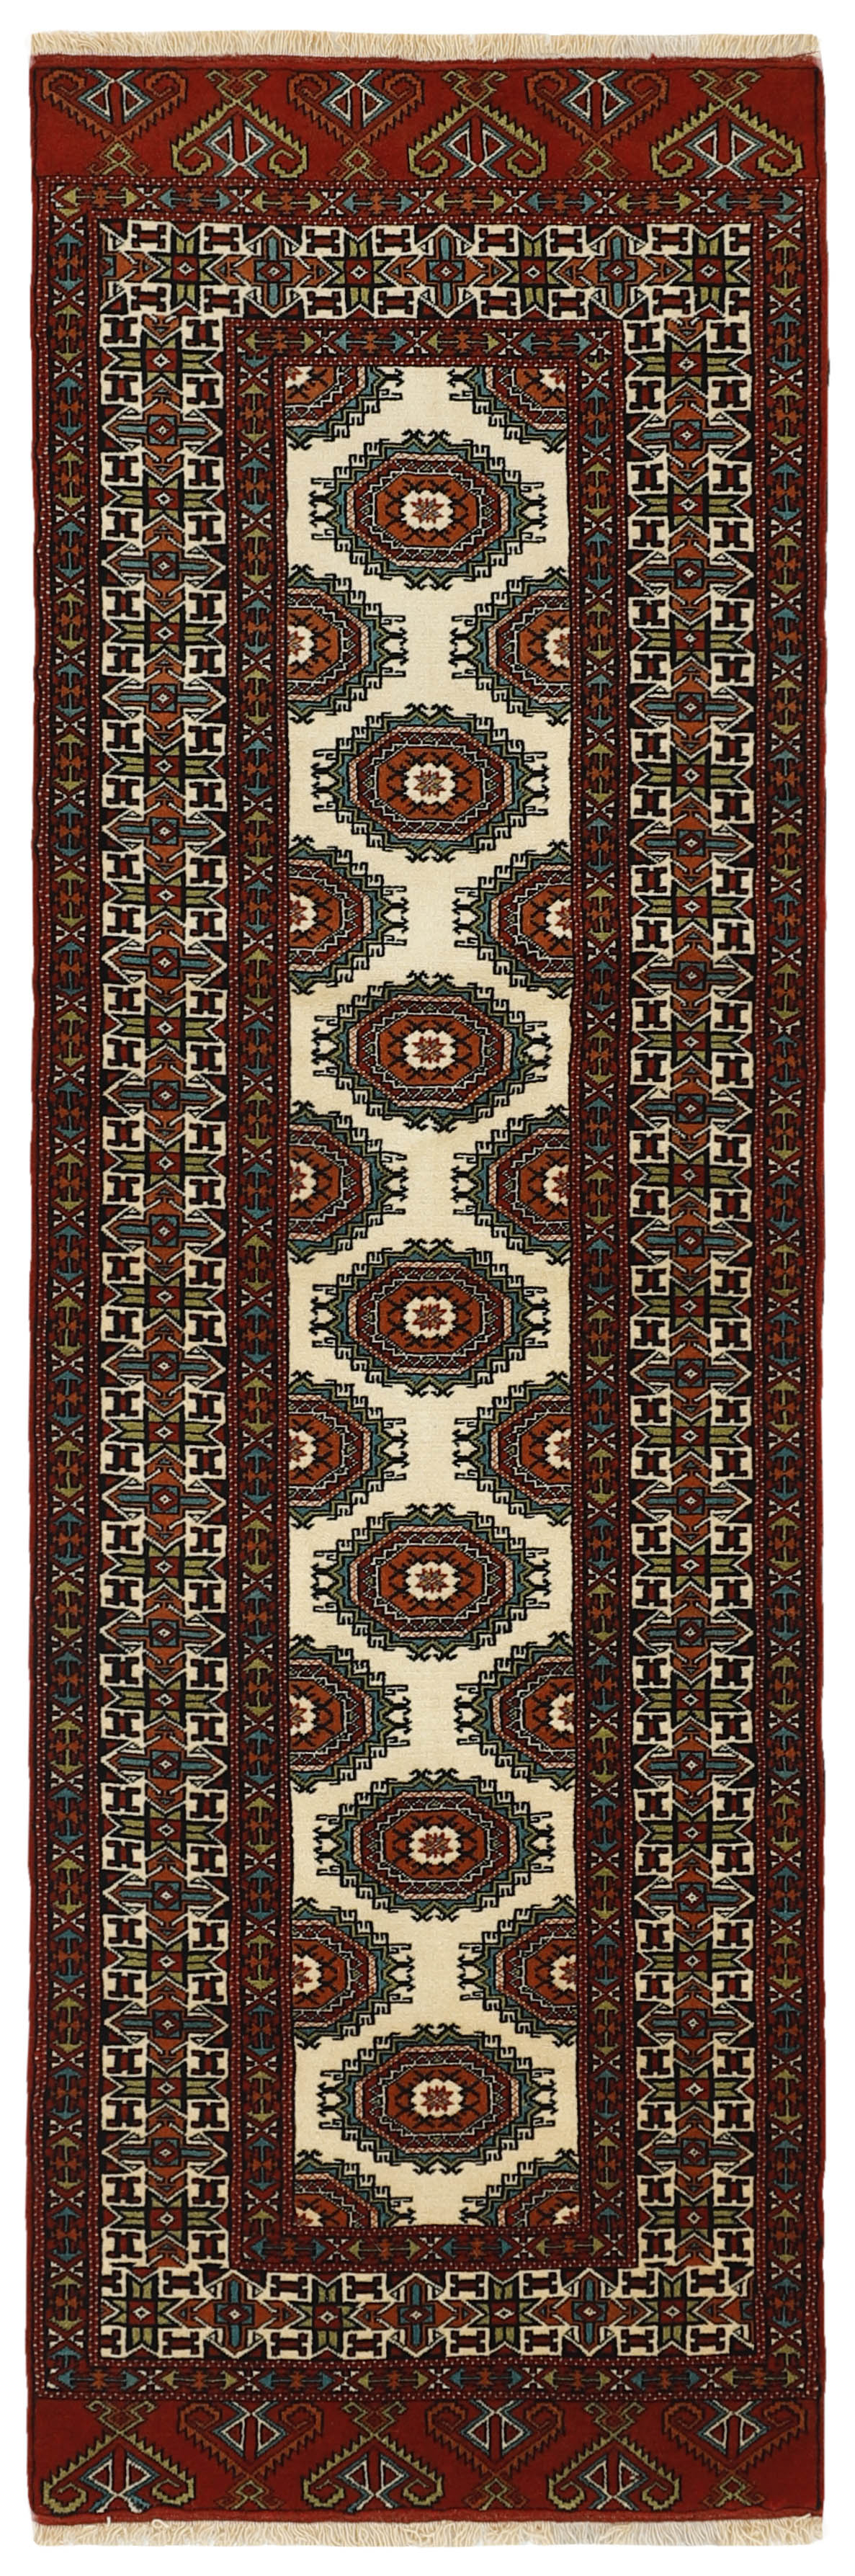 authentic red, blue and black persian runner